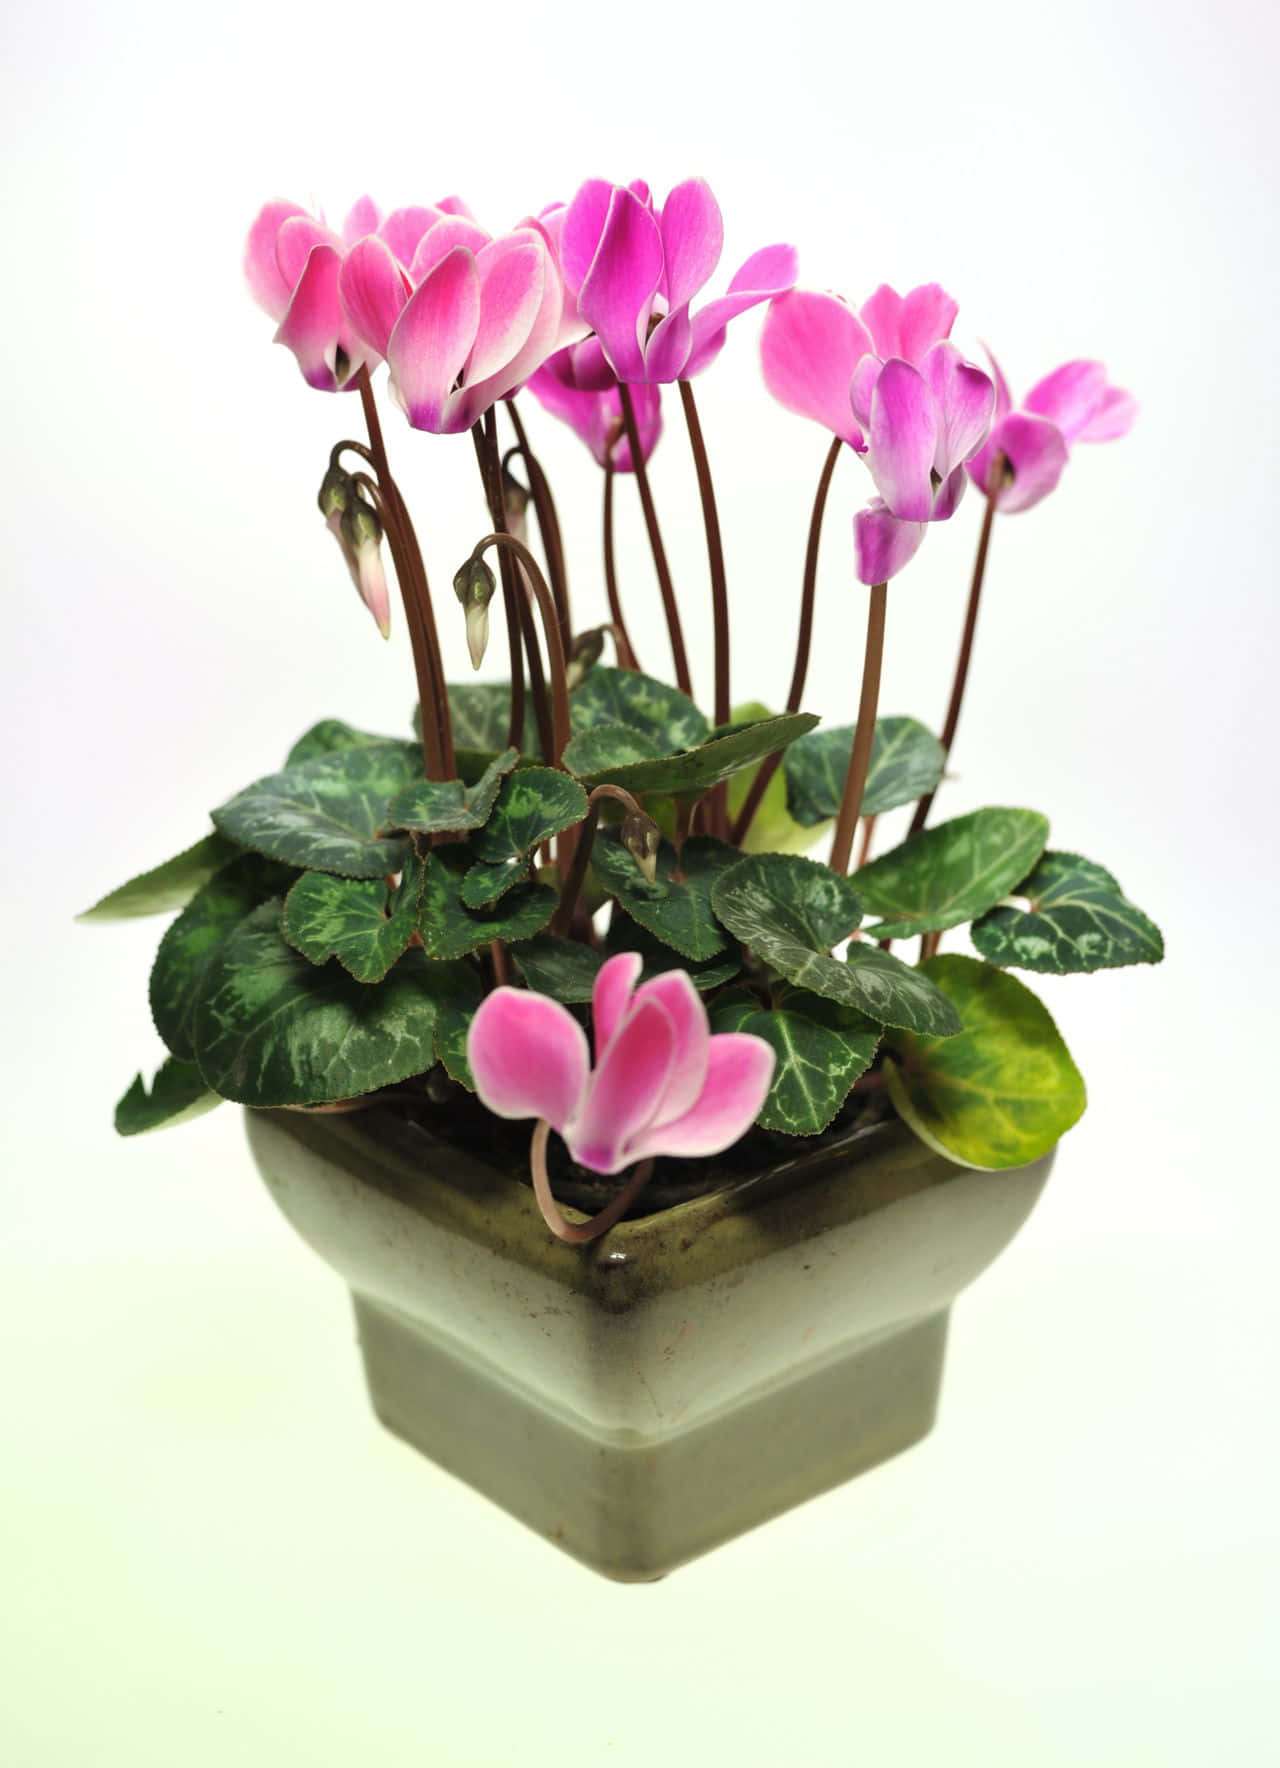 "A beautiful cyclamen flower blooming in vivid colors"